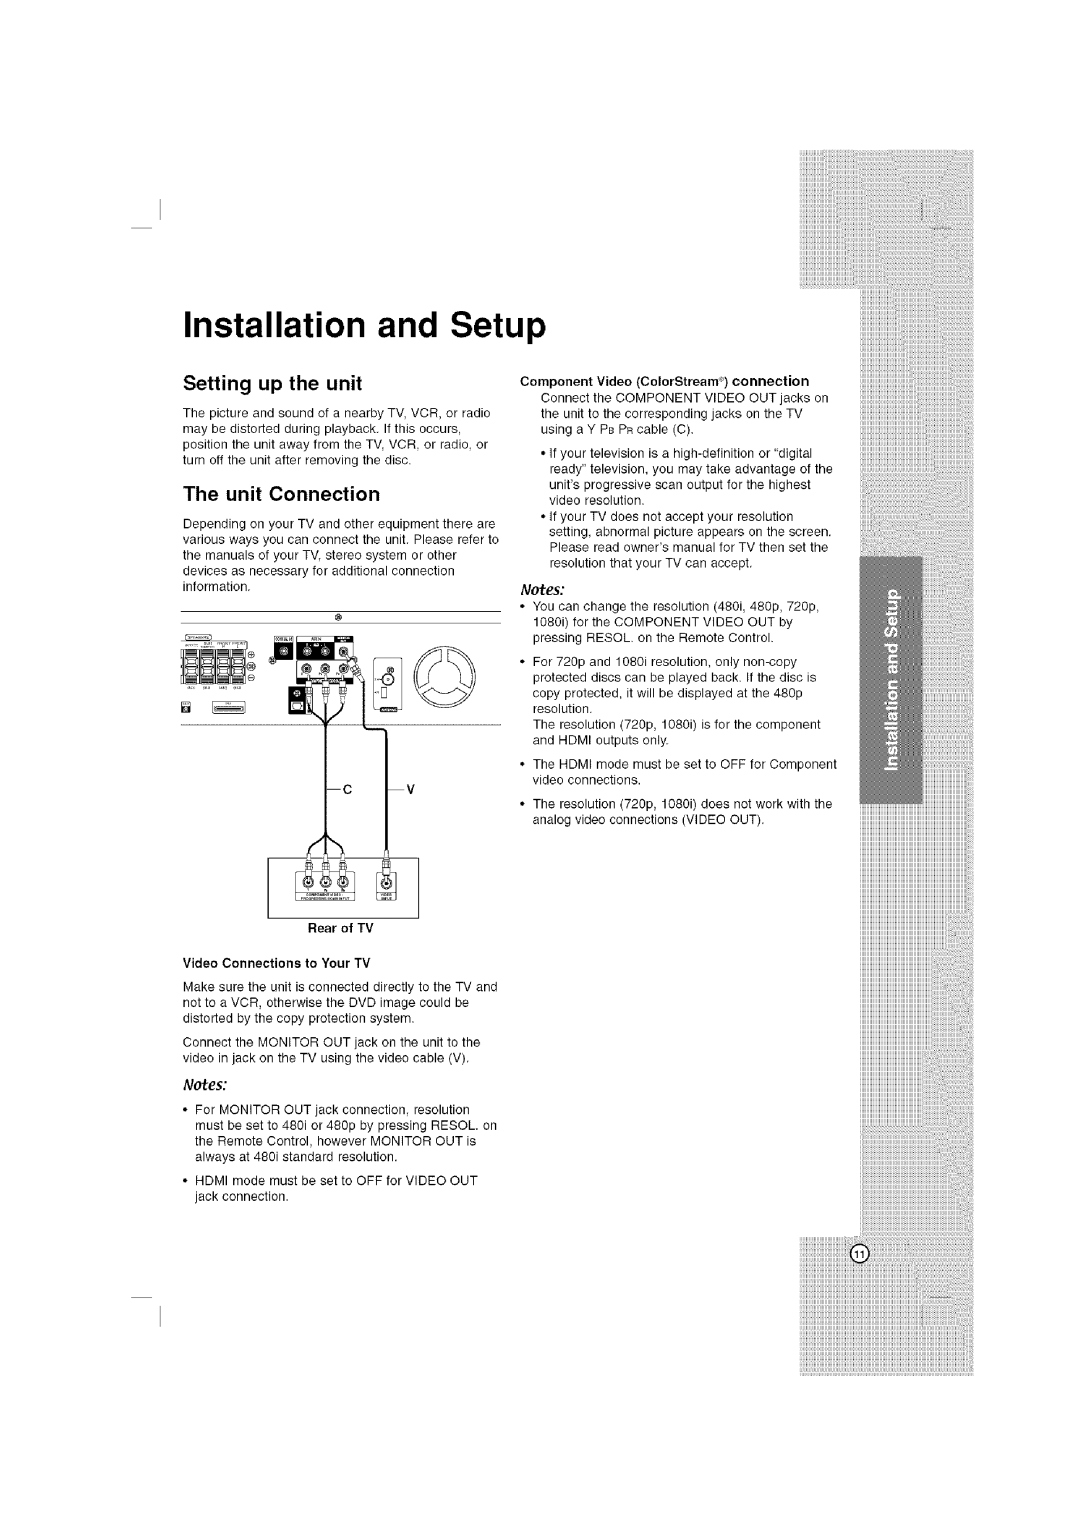 LG Electronics LHT764 owner manual Installation and Setup, Setting up the unit, The unit Connection, Rear of TV, Notes 